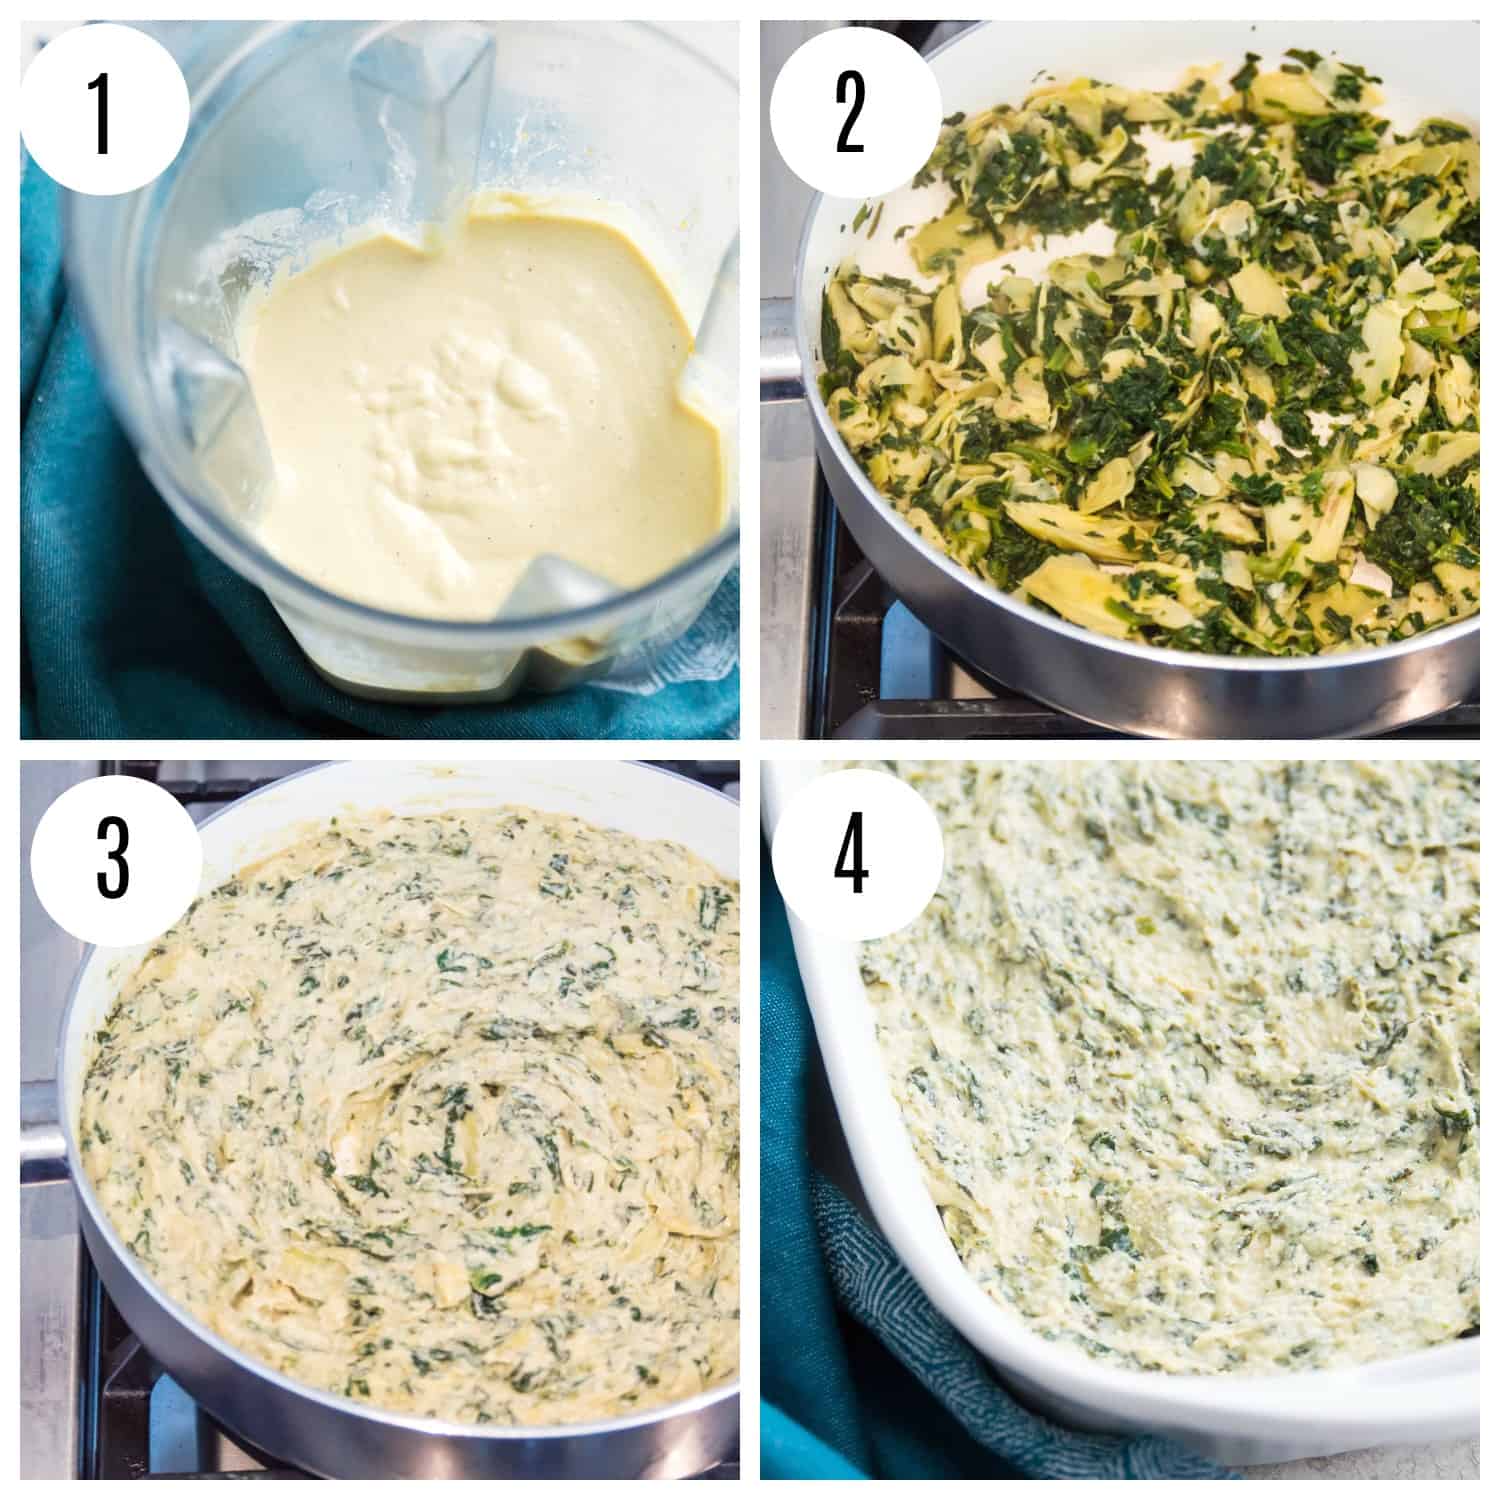 Step by step directions for making a vegan spinach and artichoke dip.